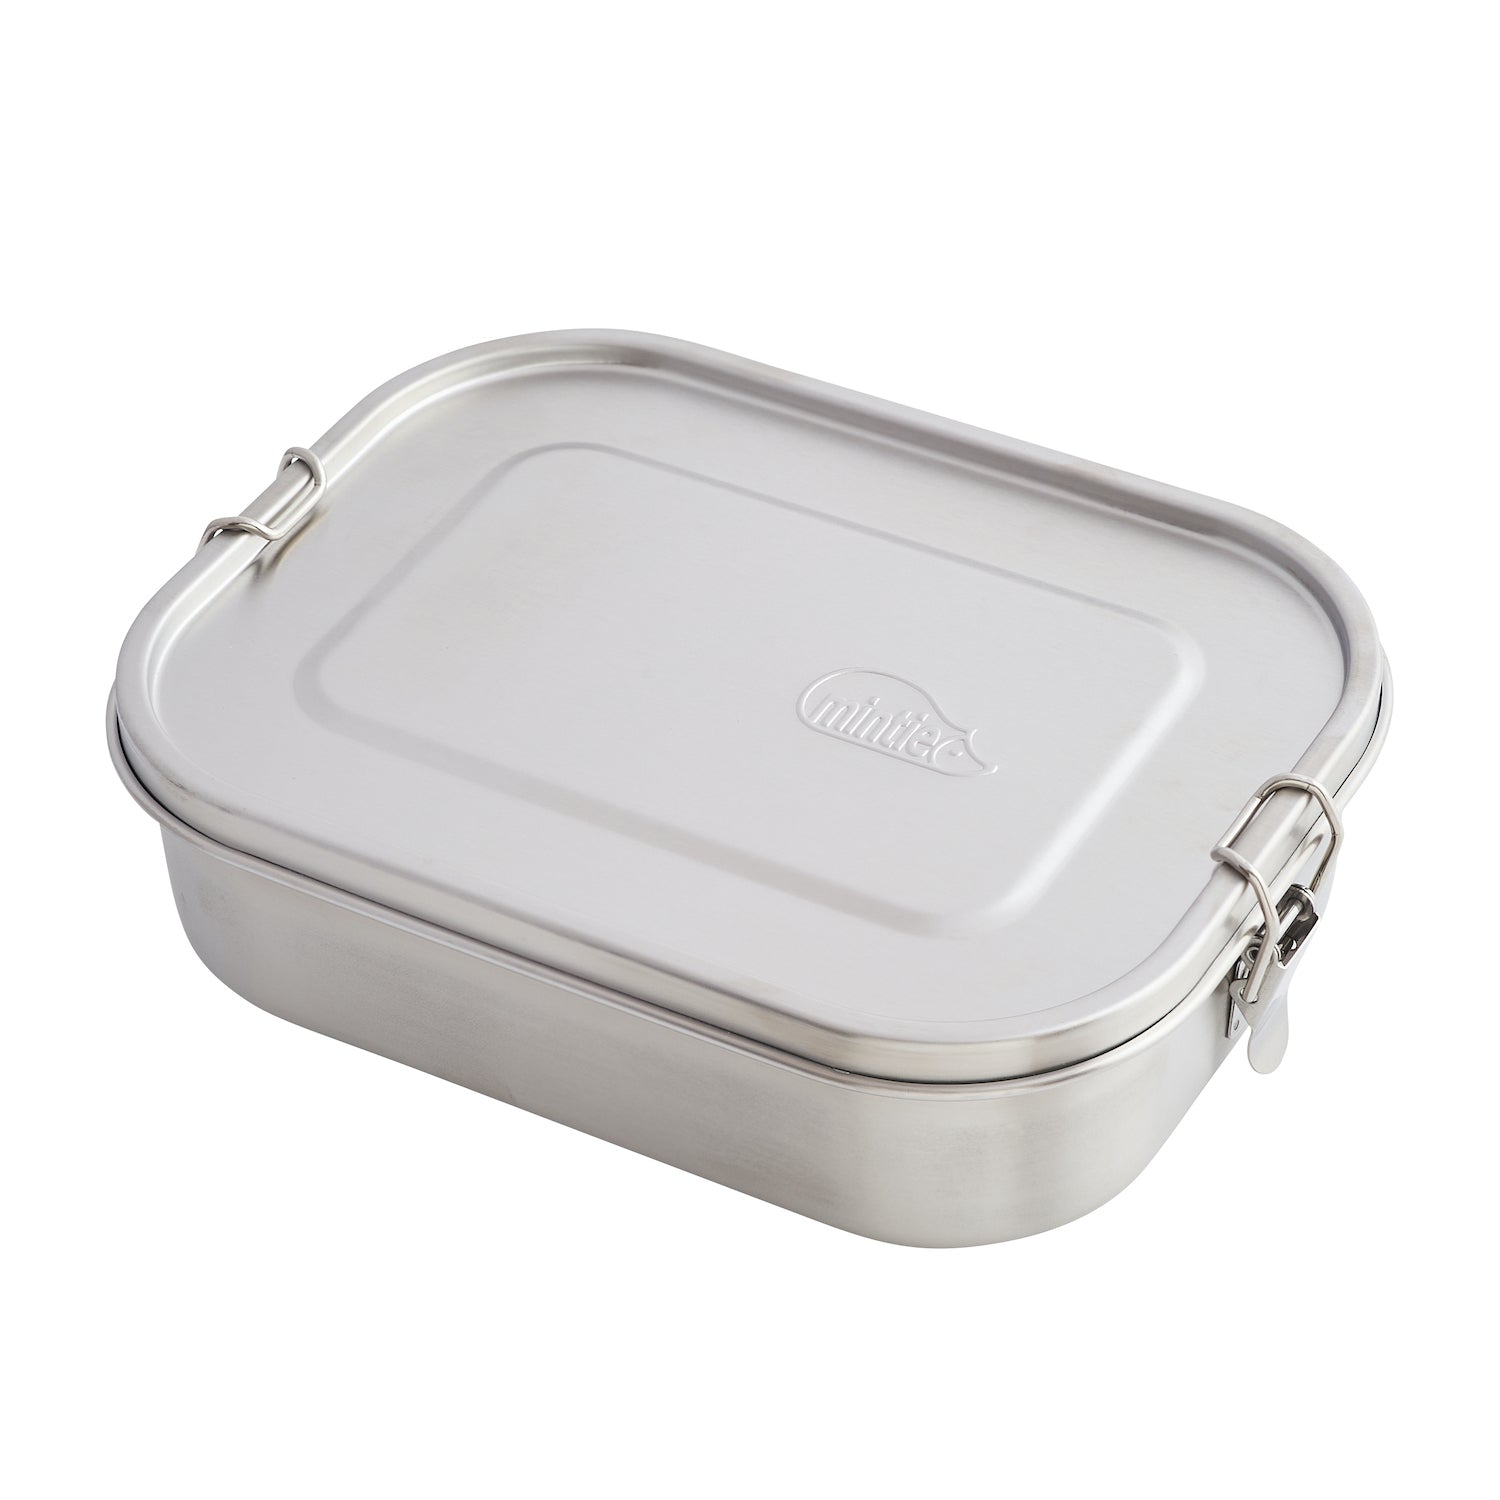 Snug Max 1.4l Stainless Steel Lunch Box